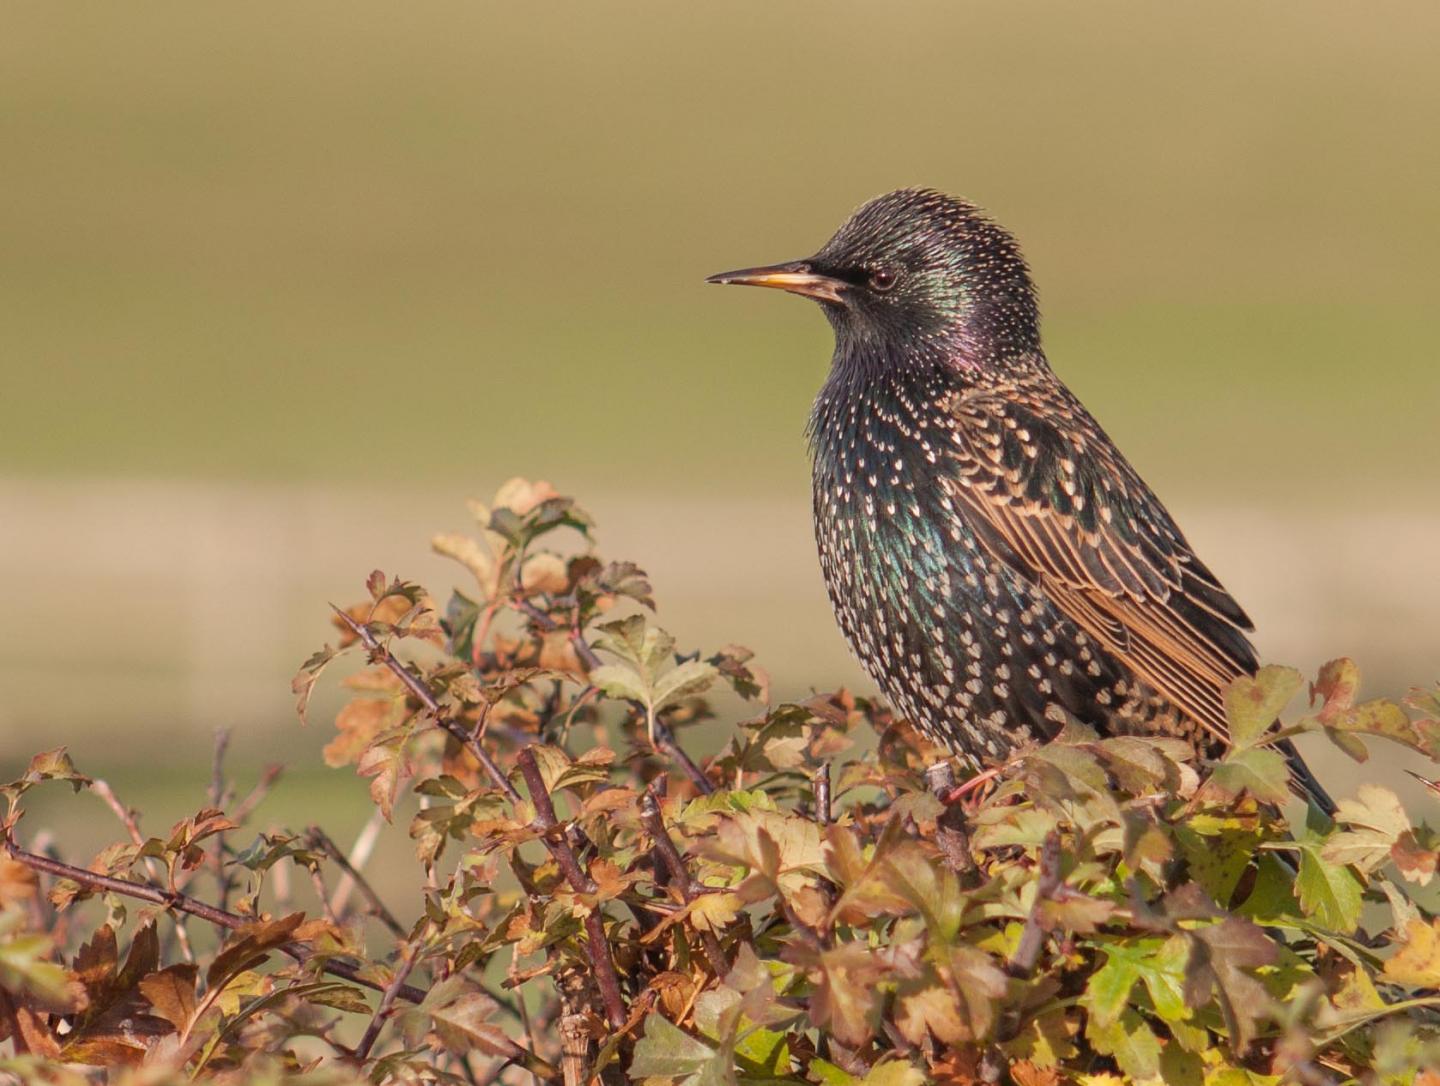 Starling (1 of 3)